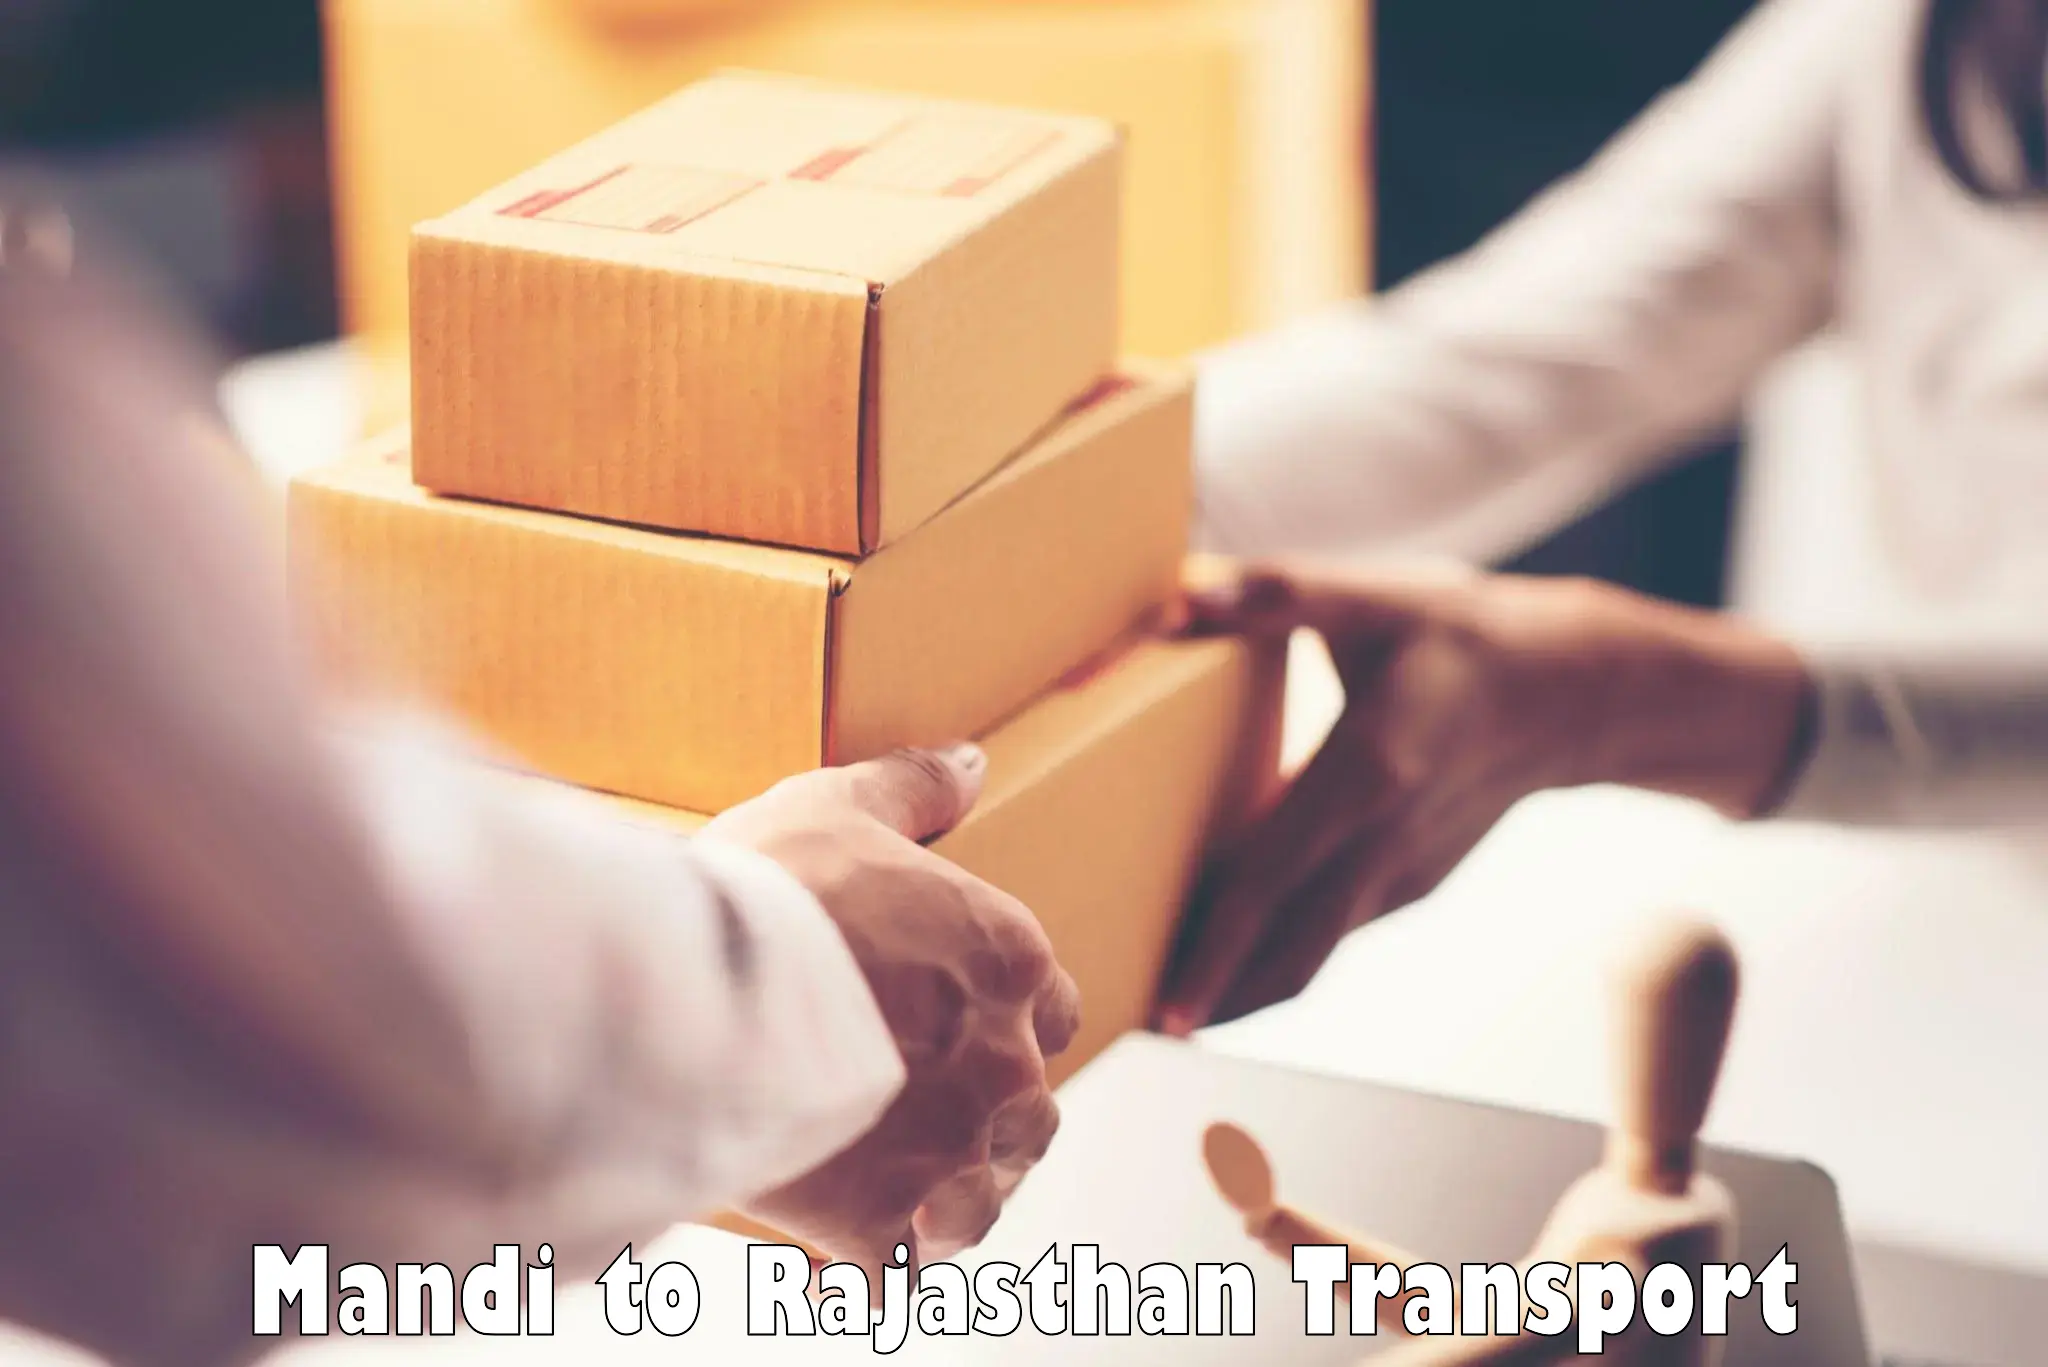 Best transport services in India in Mandi to Jaipur